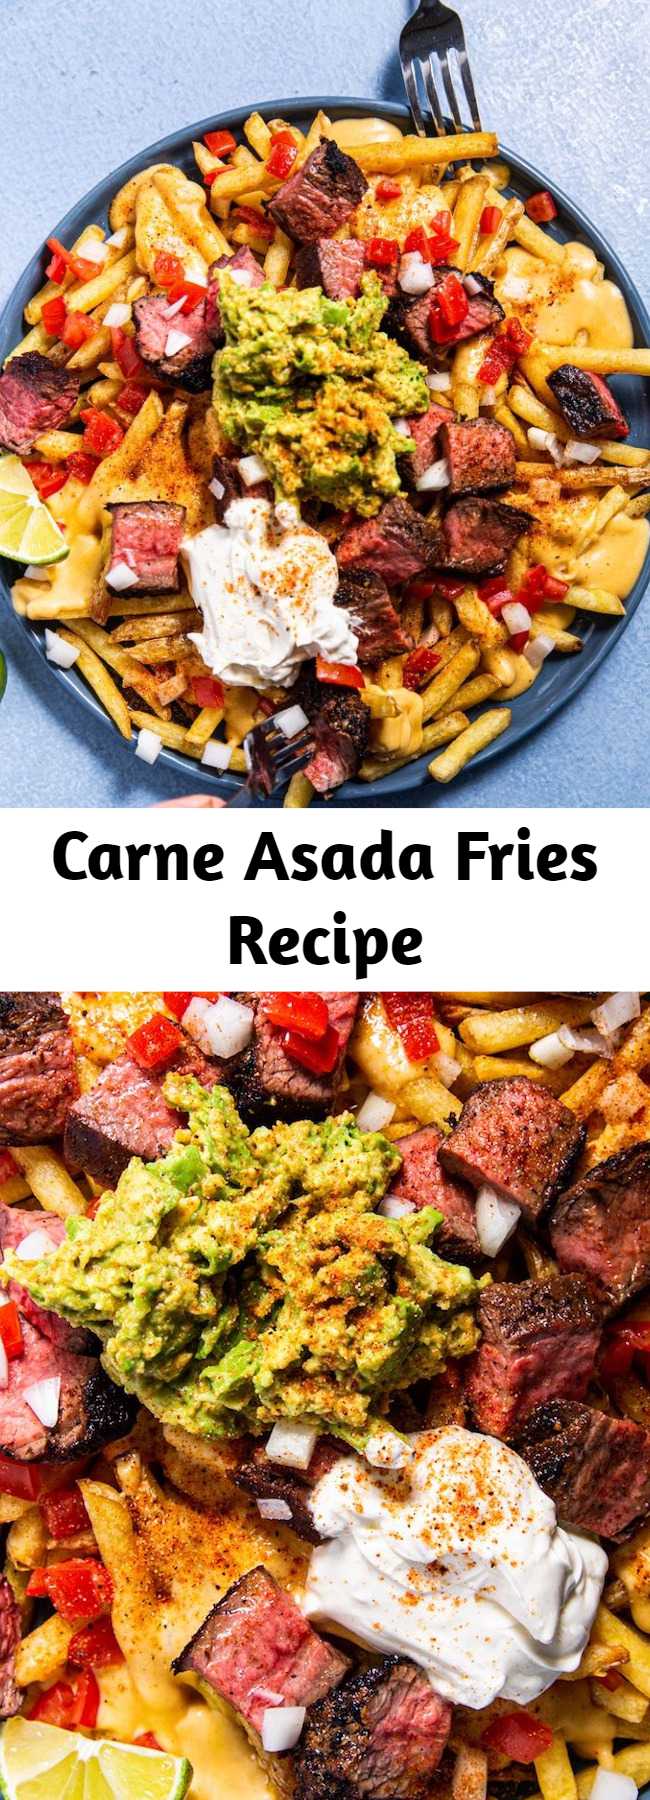 Carne Asada Fries Recipe - These super decadent fries are Tex-Mex in it's truest form. Perfect for watch parties, game-day celebrations, and serious steak cravings.